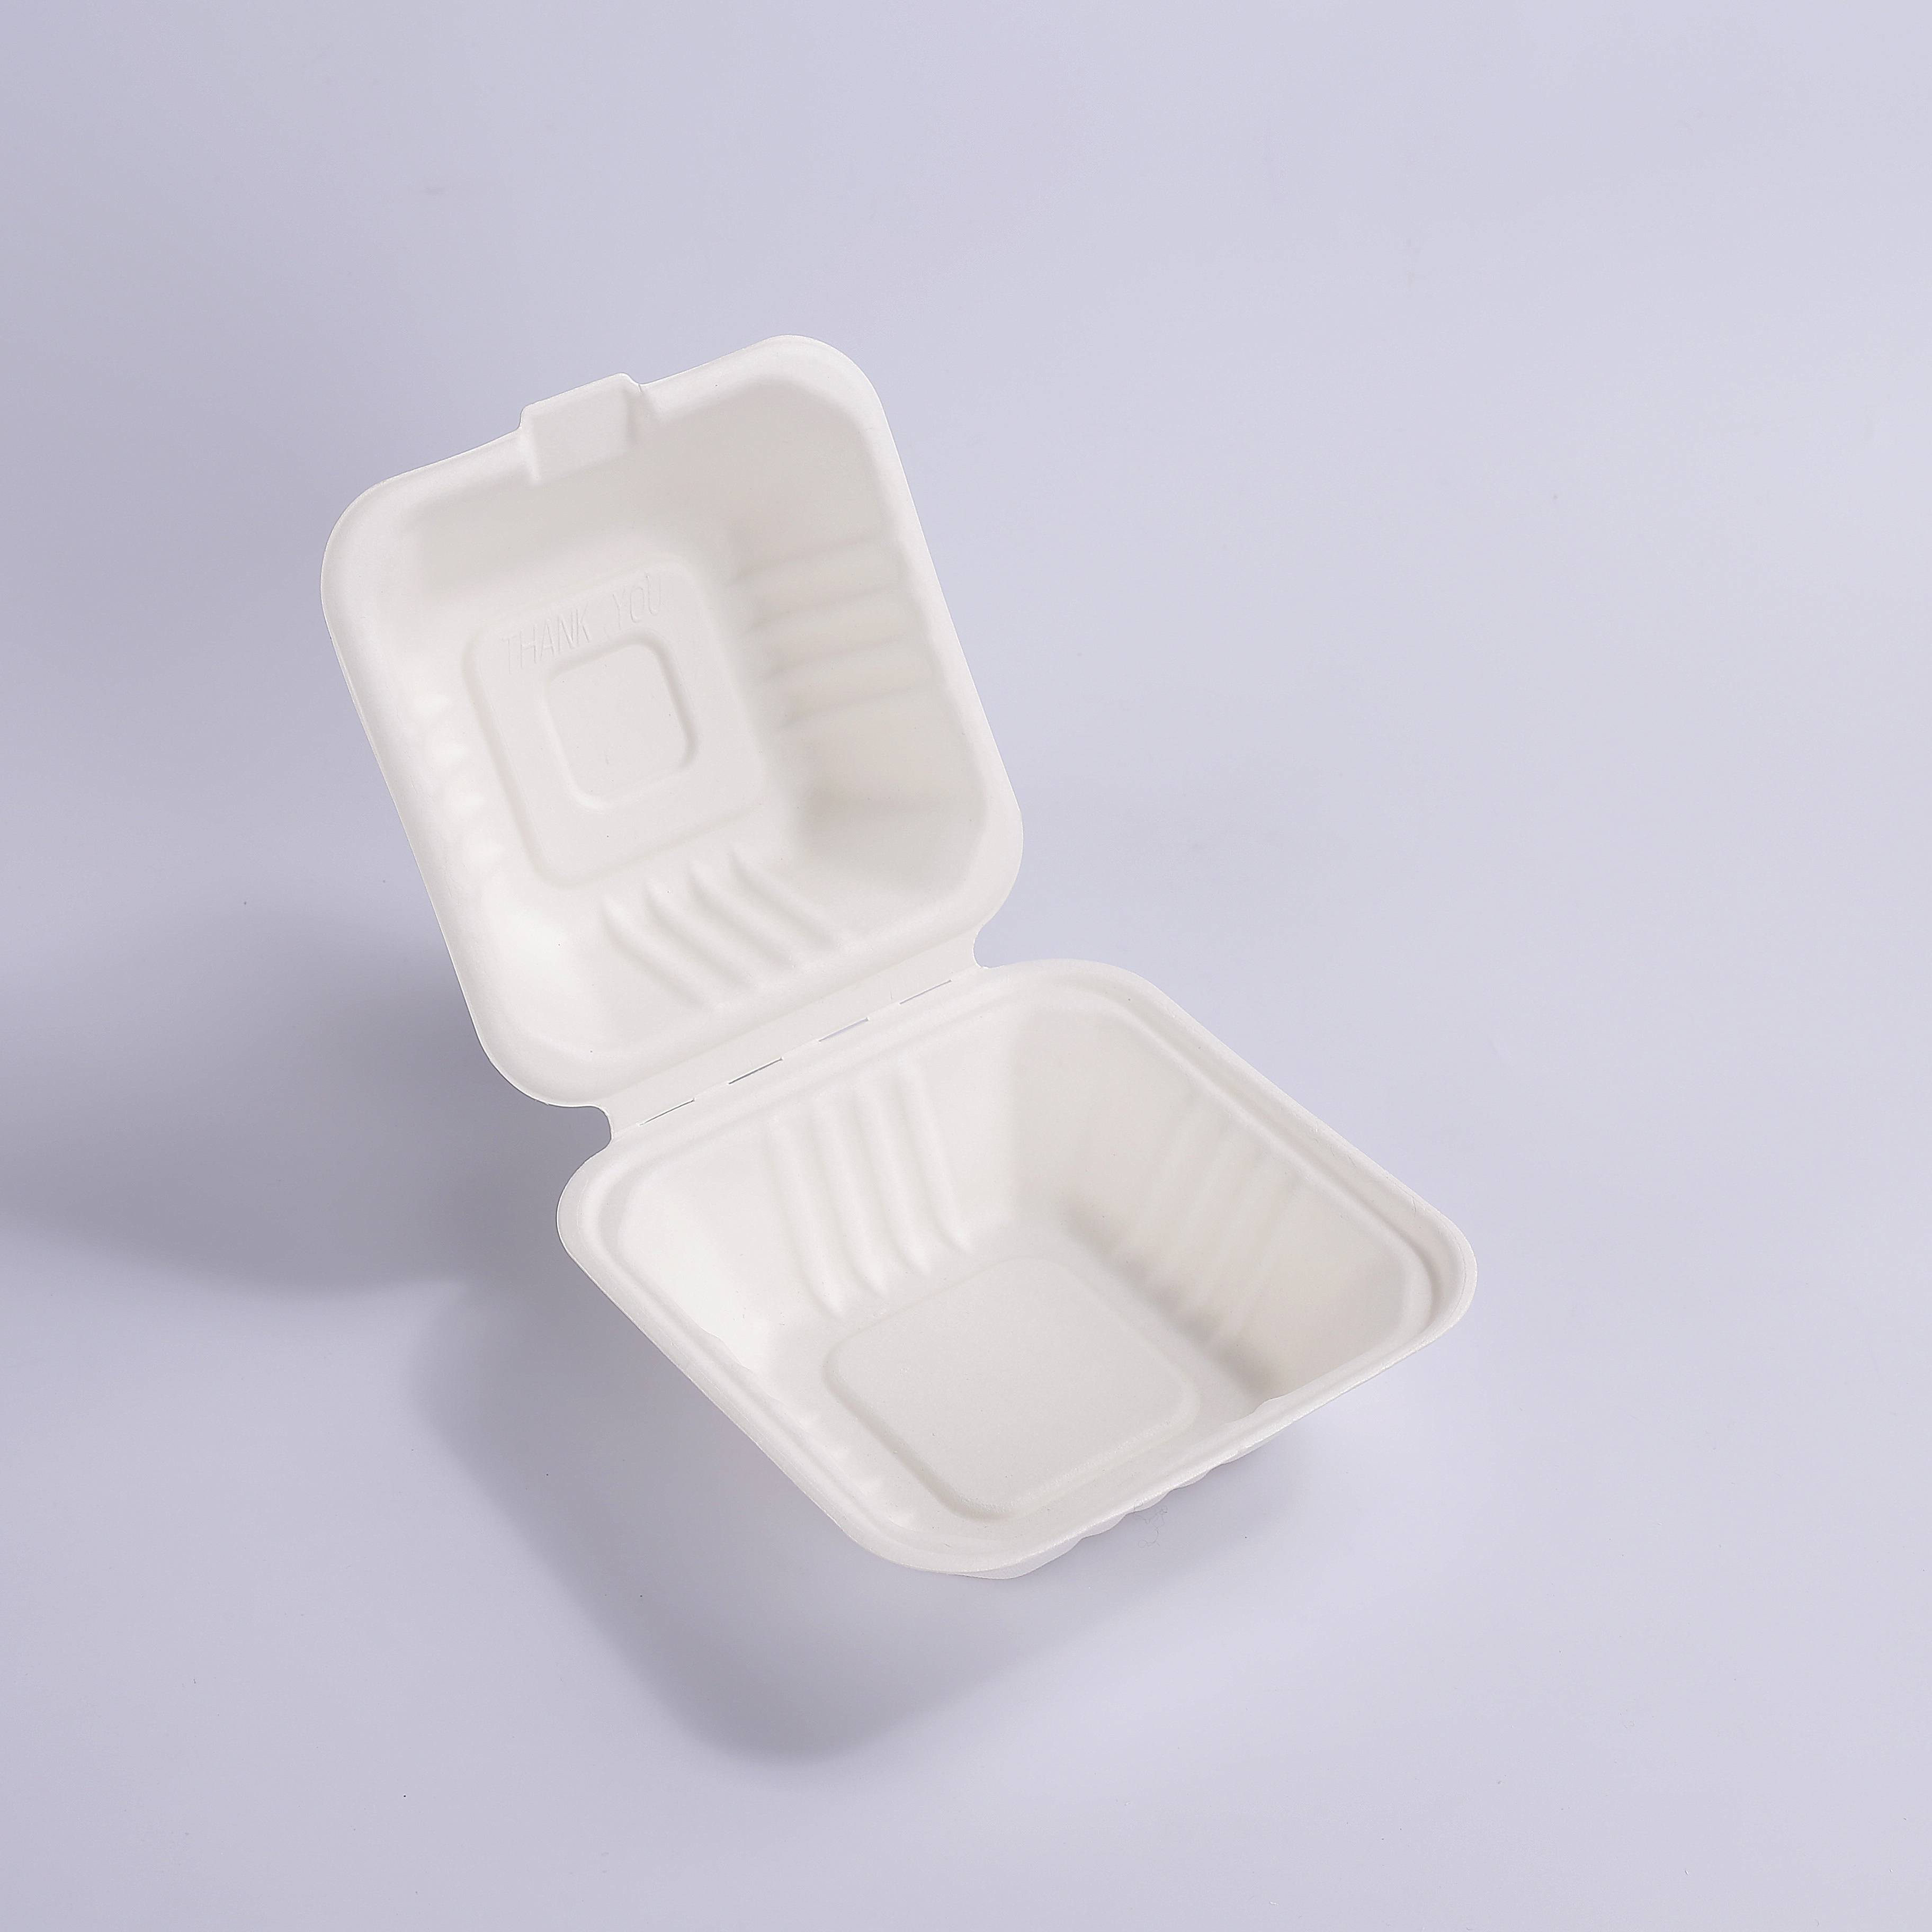 Food Takeaway Containers Disposable